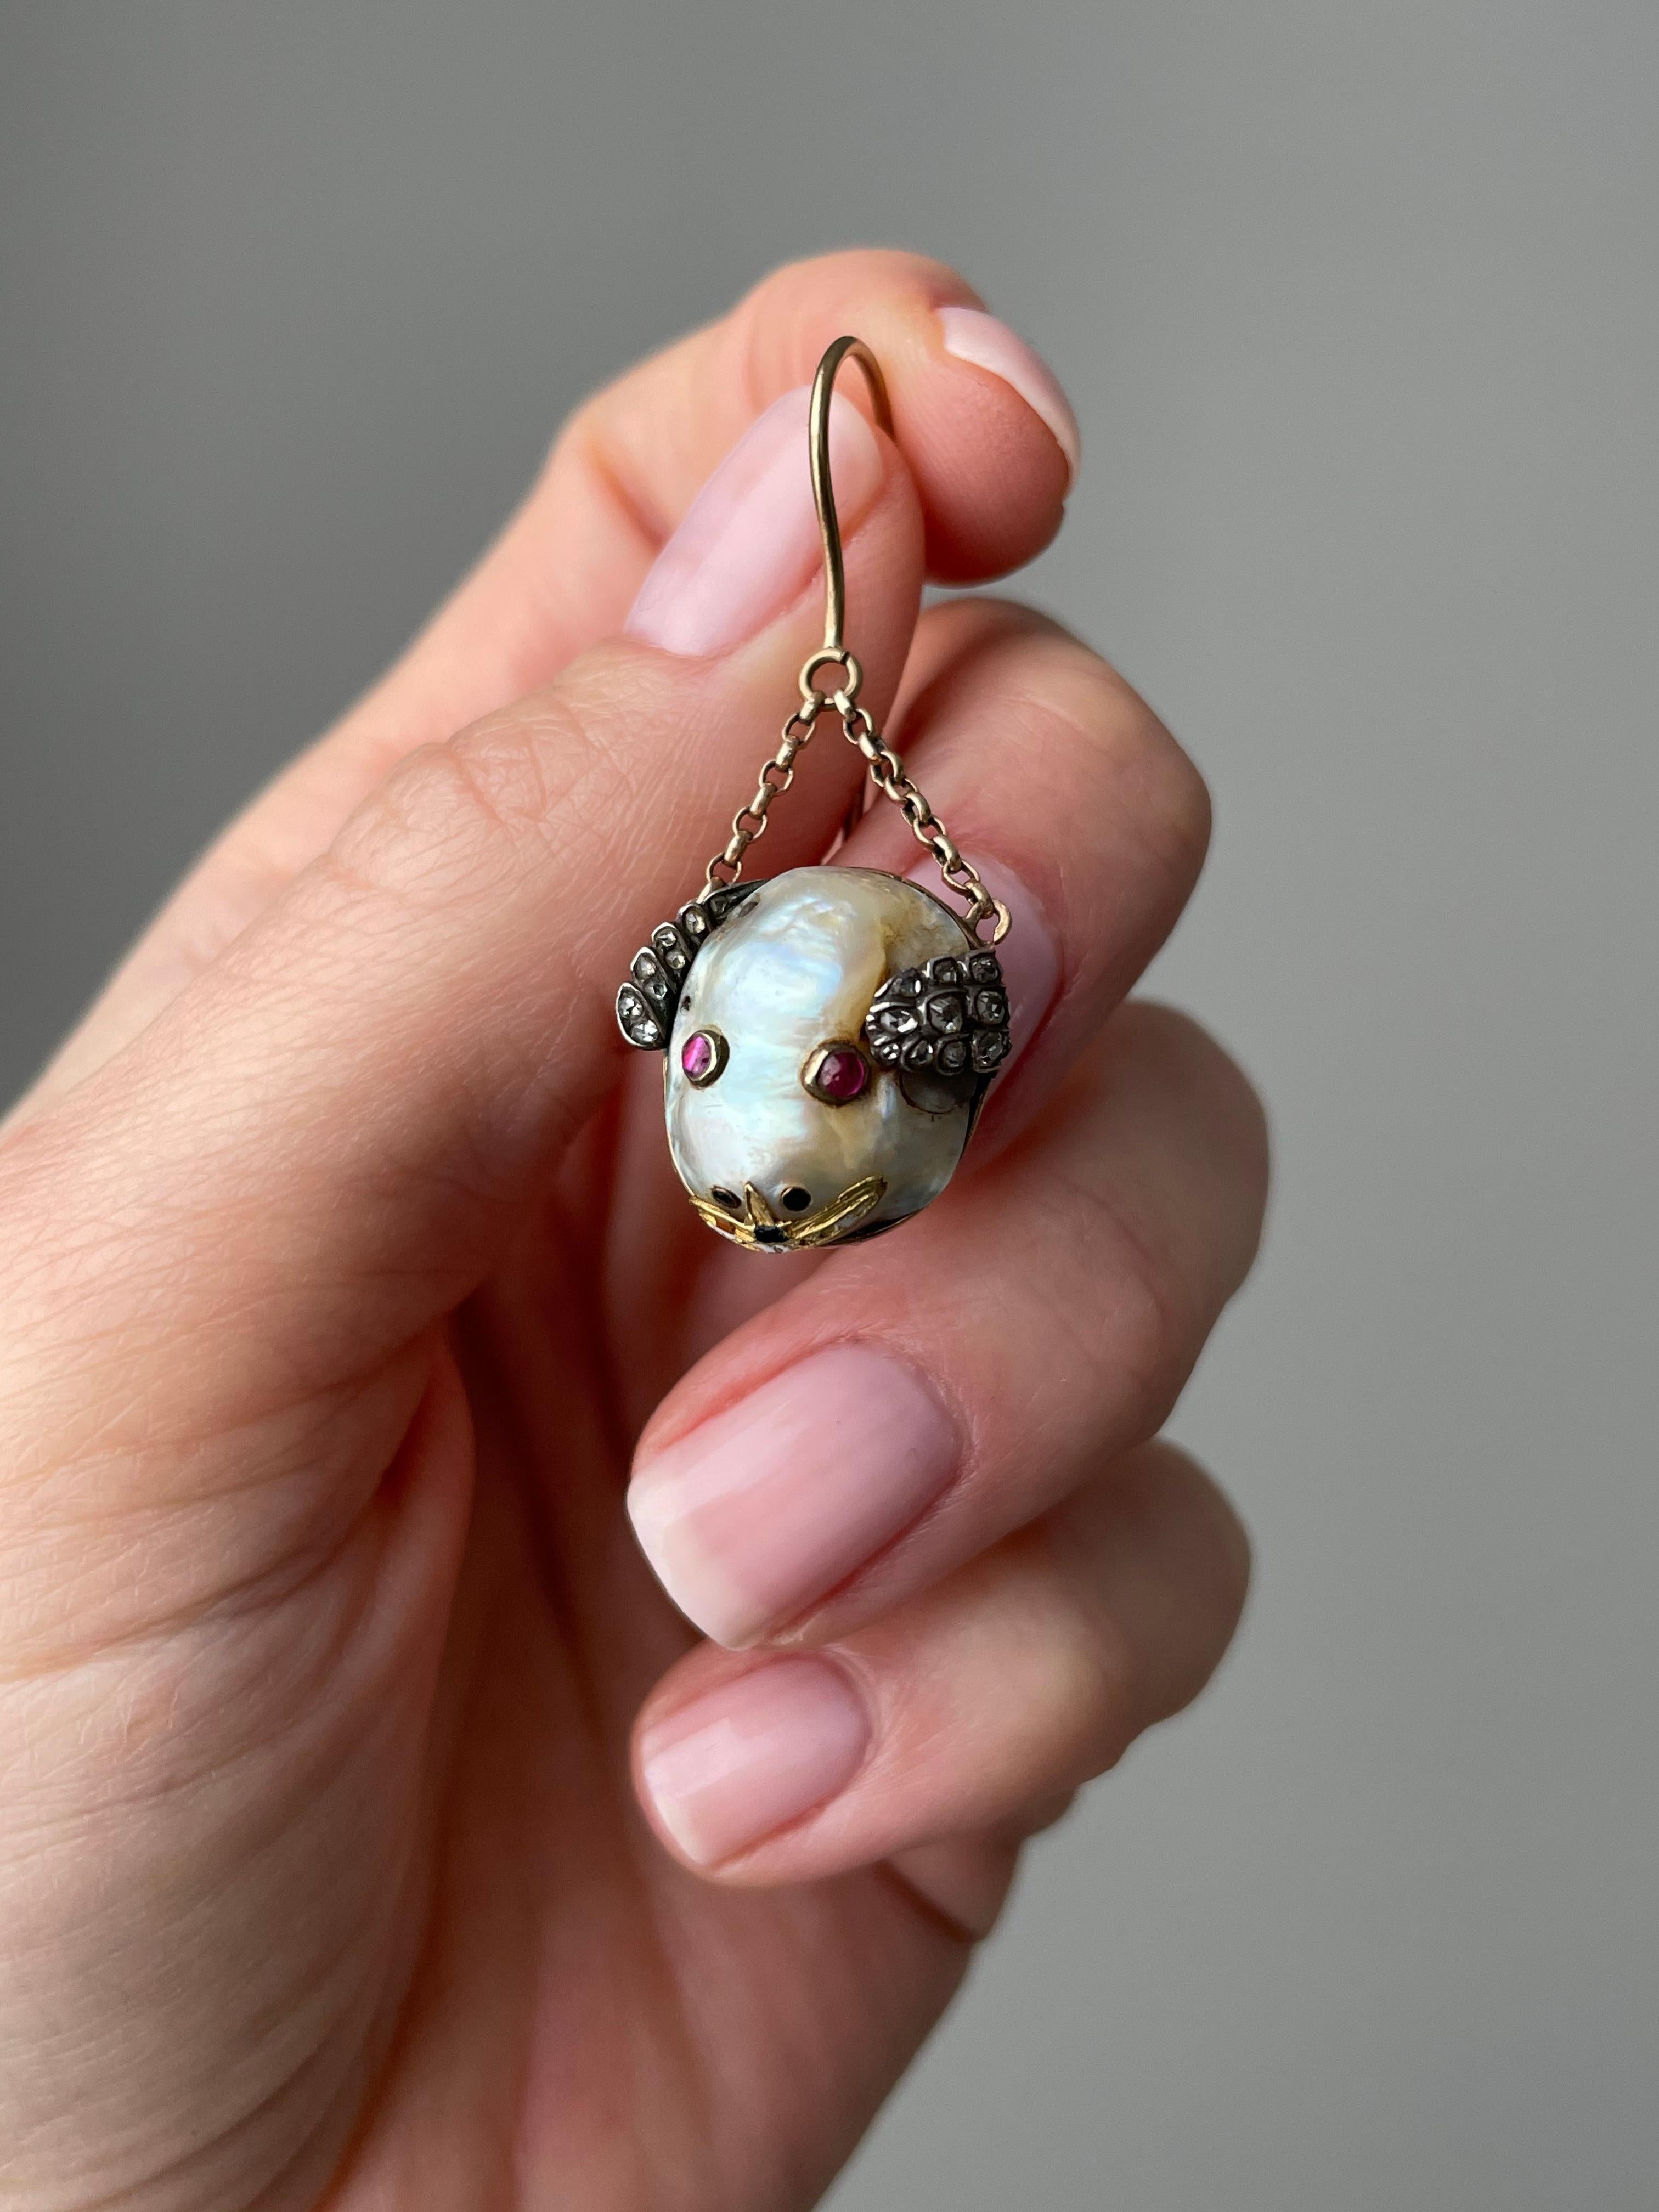 A pair of whimsical baroque pearl mice with glowing ruby eyes, twinkling diamond ears and an enameled grin. Dating to around 1850, these crazy critters are suspended by two short lengths of delicate, hand fabricated chain, giving them lots of